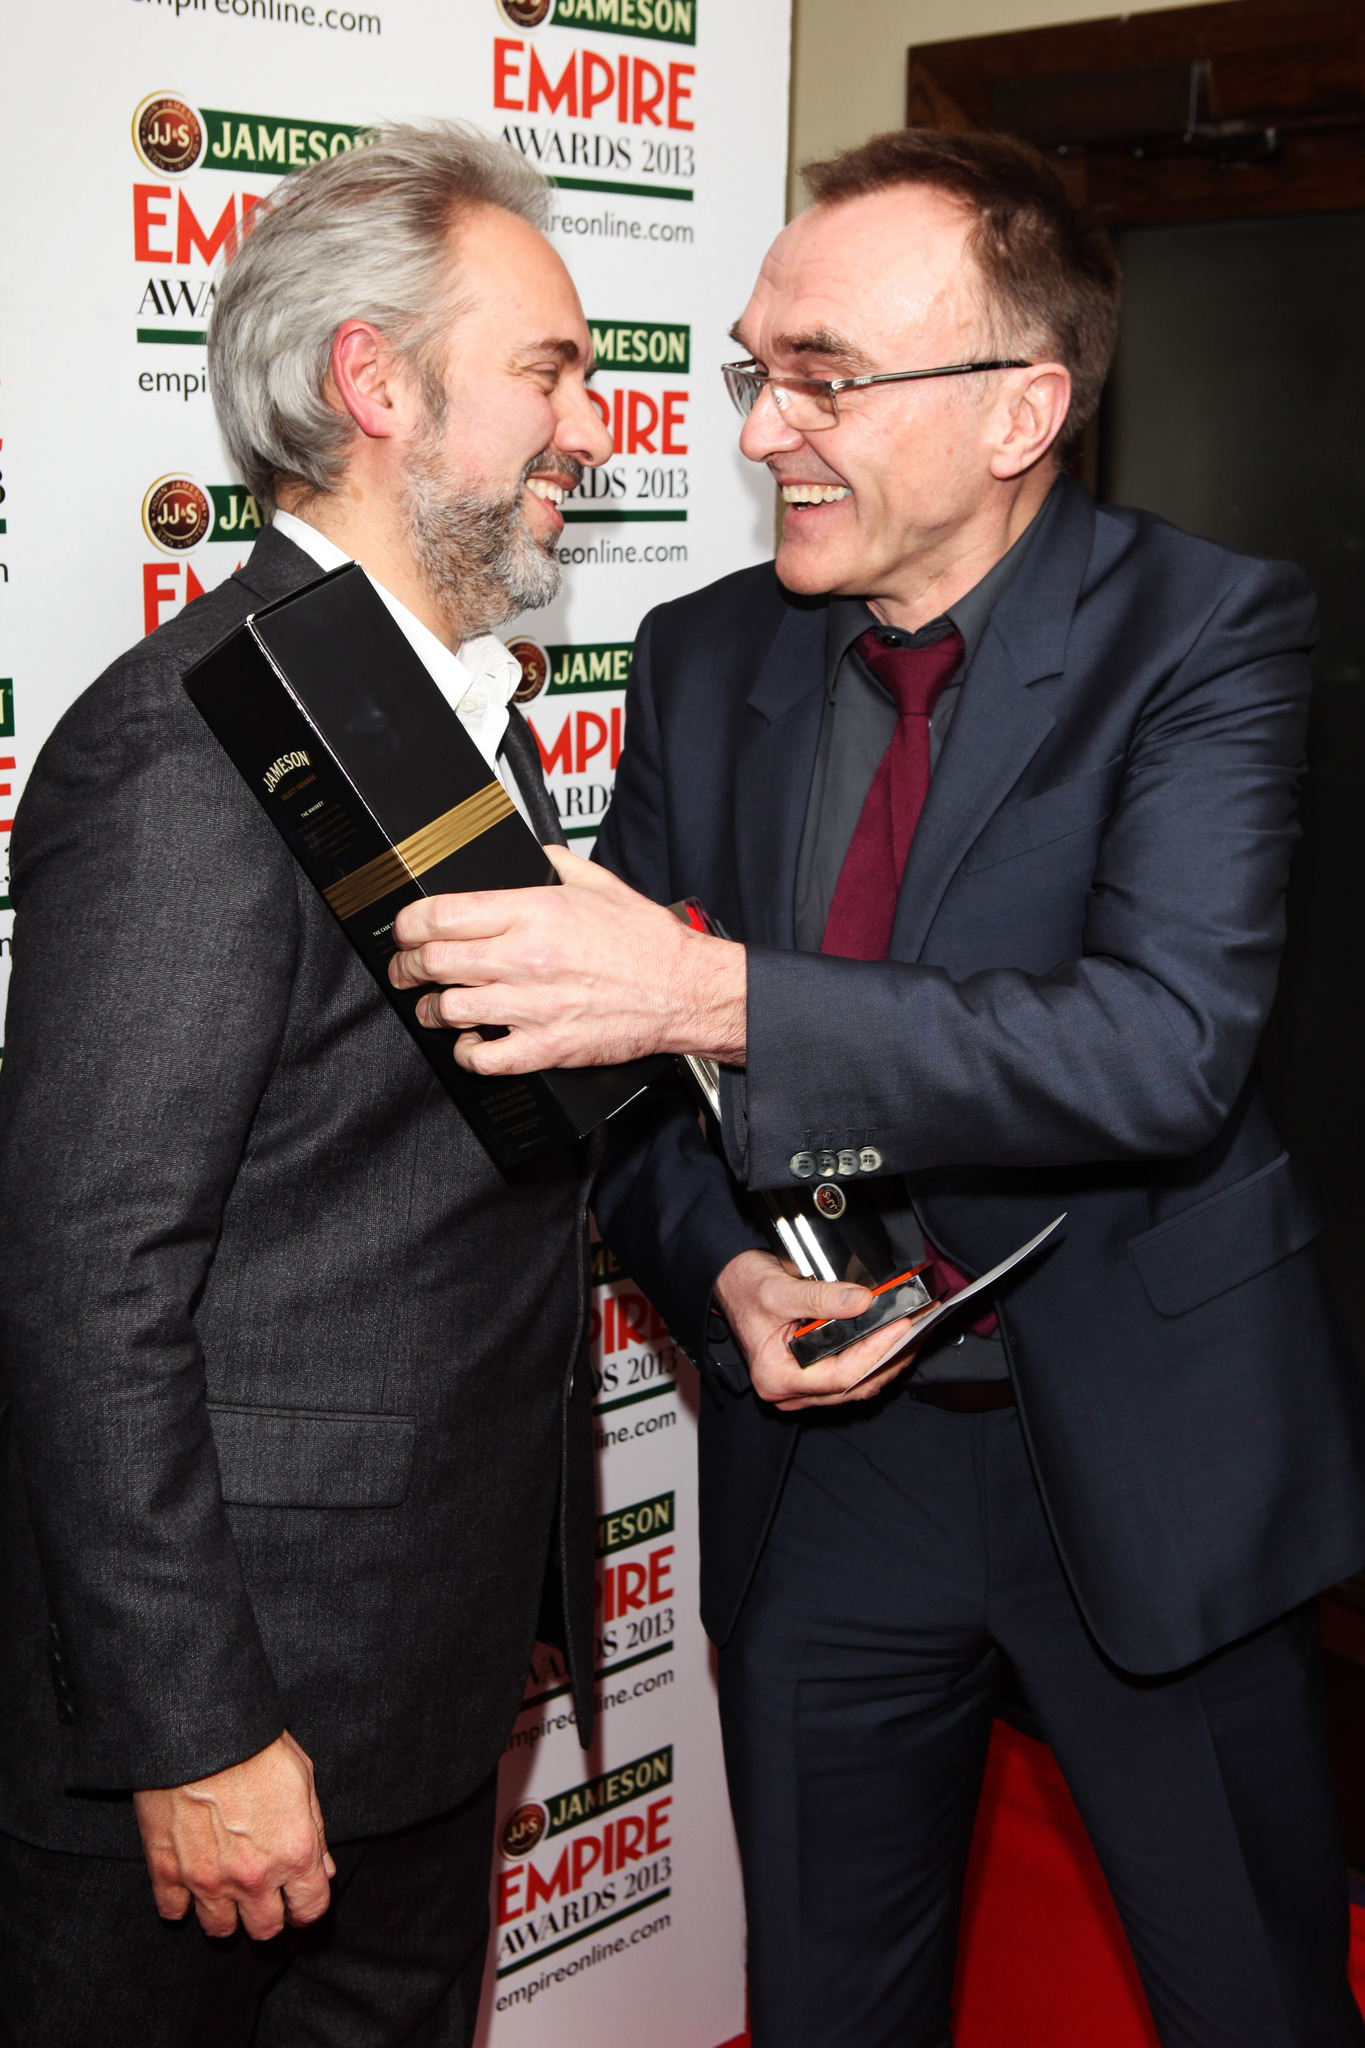 Danny Boyle and Sam Mendes